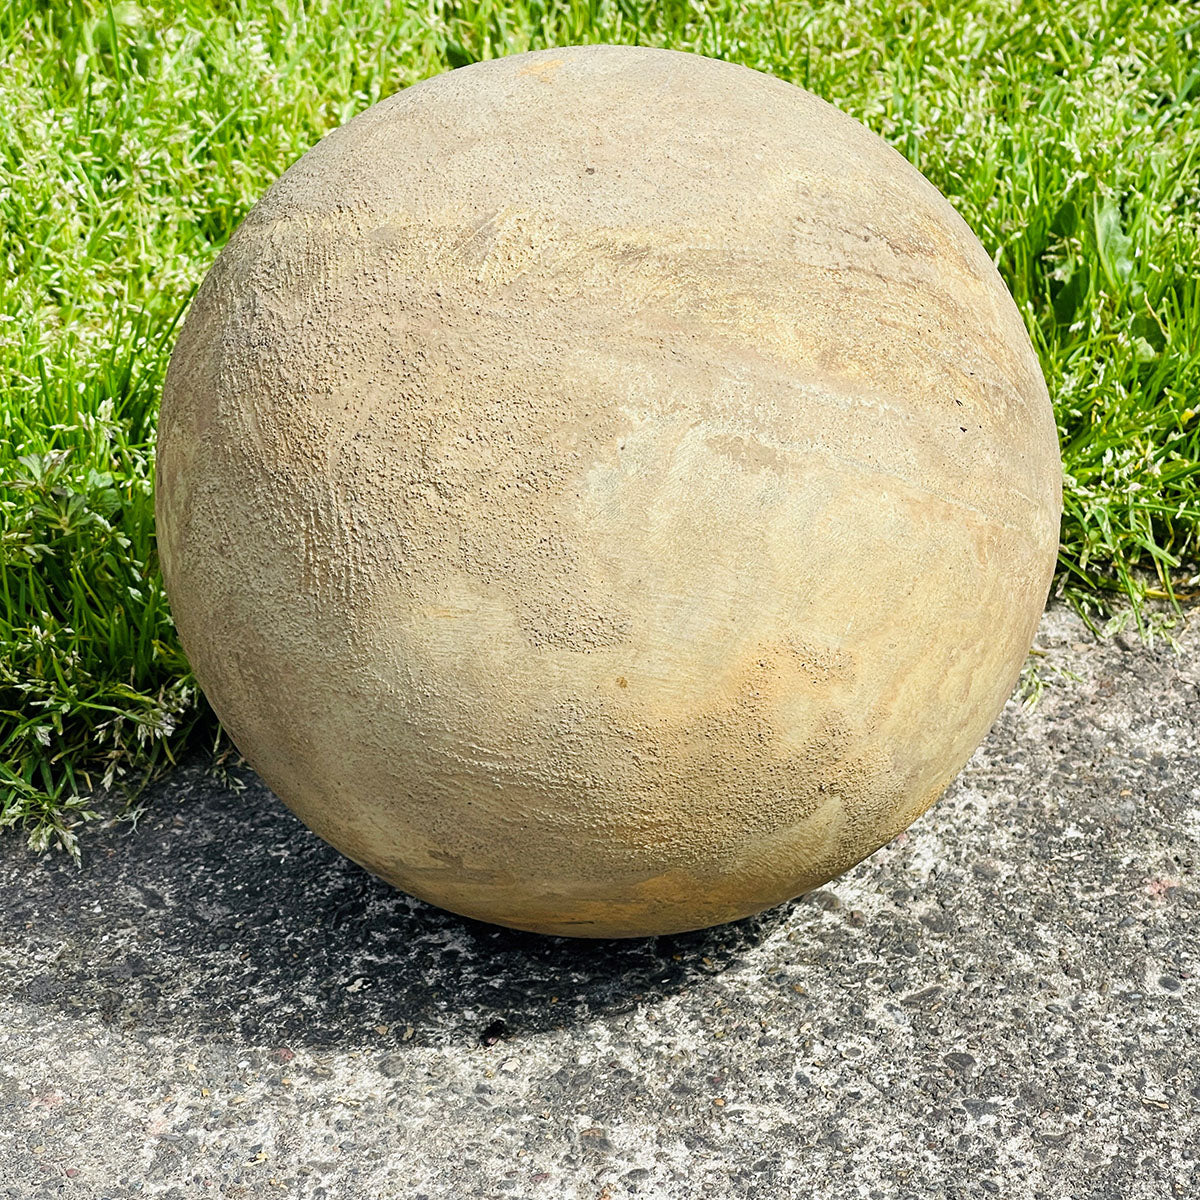 8 Inch Half Ball sphere plaster or concrete mold 7072 - Moldcreations